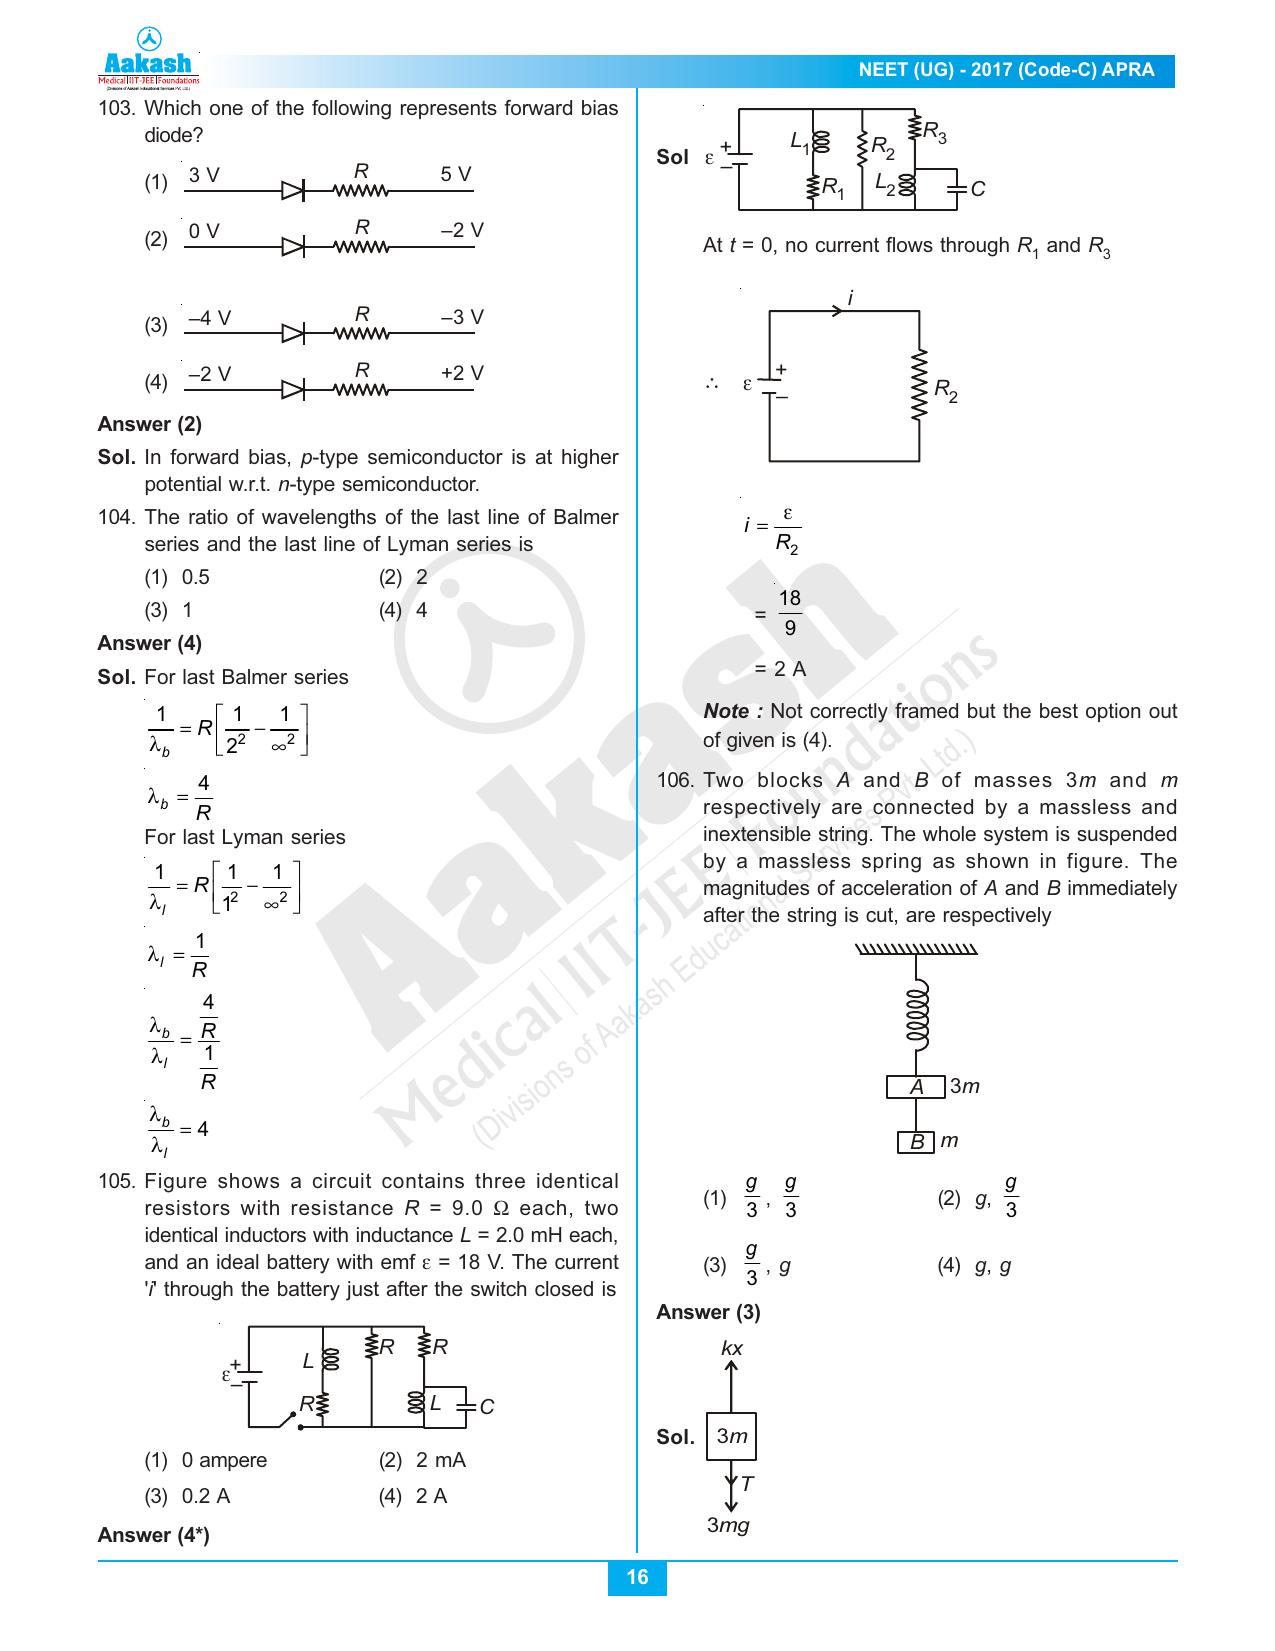  NEET Code C 2017 Answer & Solutions - Page 16